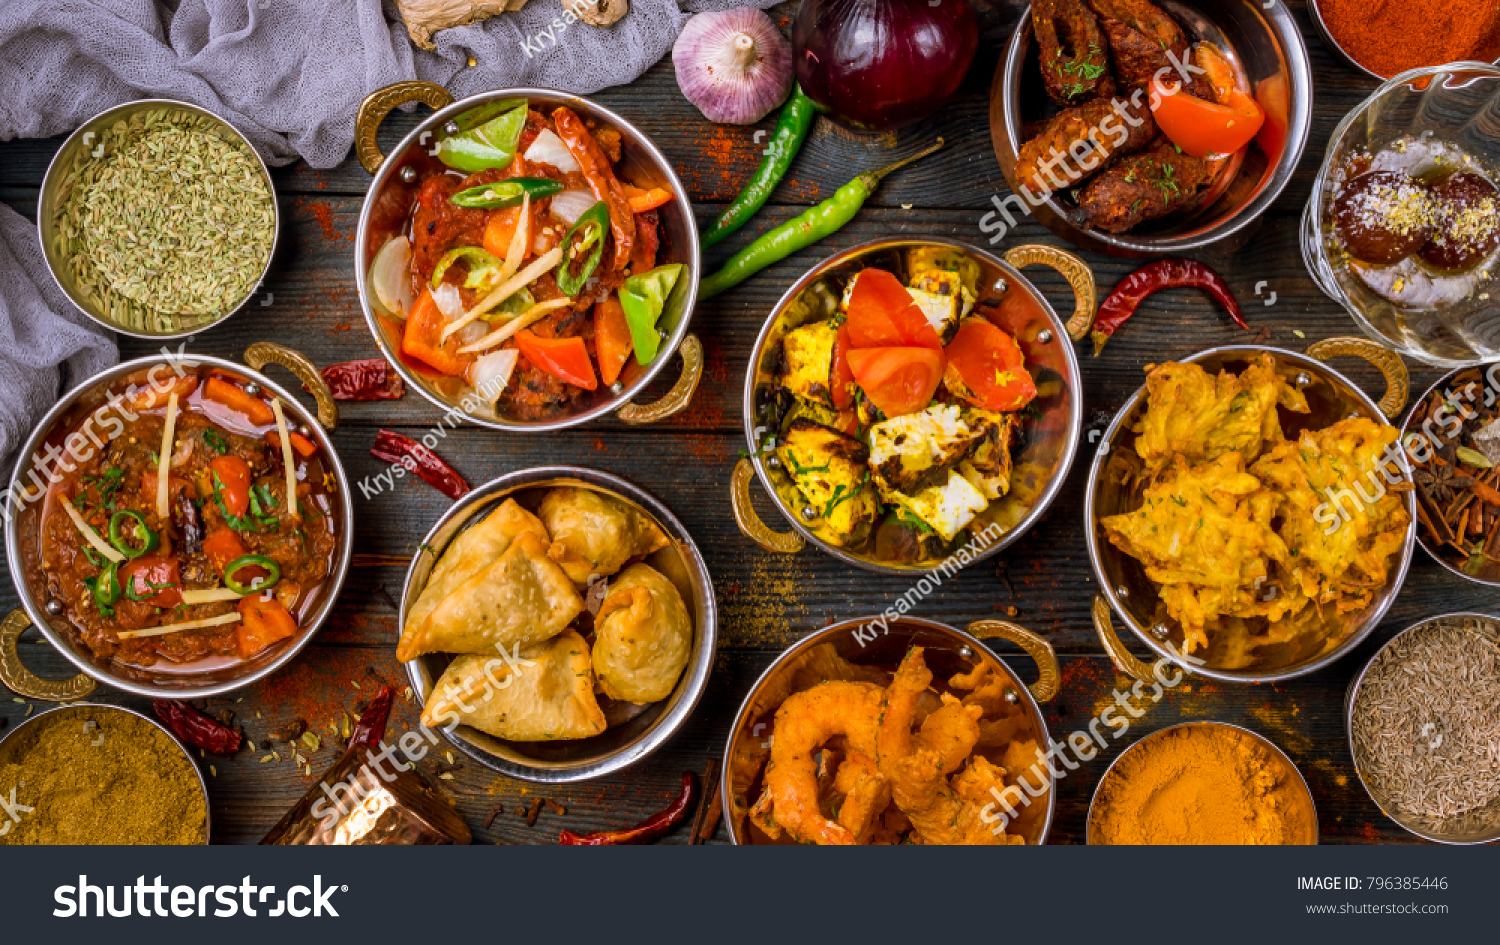 Assorted indian food set on wooden background. Dishes and appetisers of indeed cuisine, rice, lentils, paneer, samosa, spices, masala. Bowls and plates with indian food top view #796385446